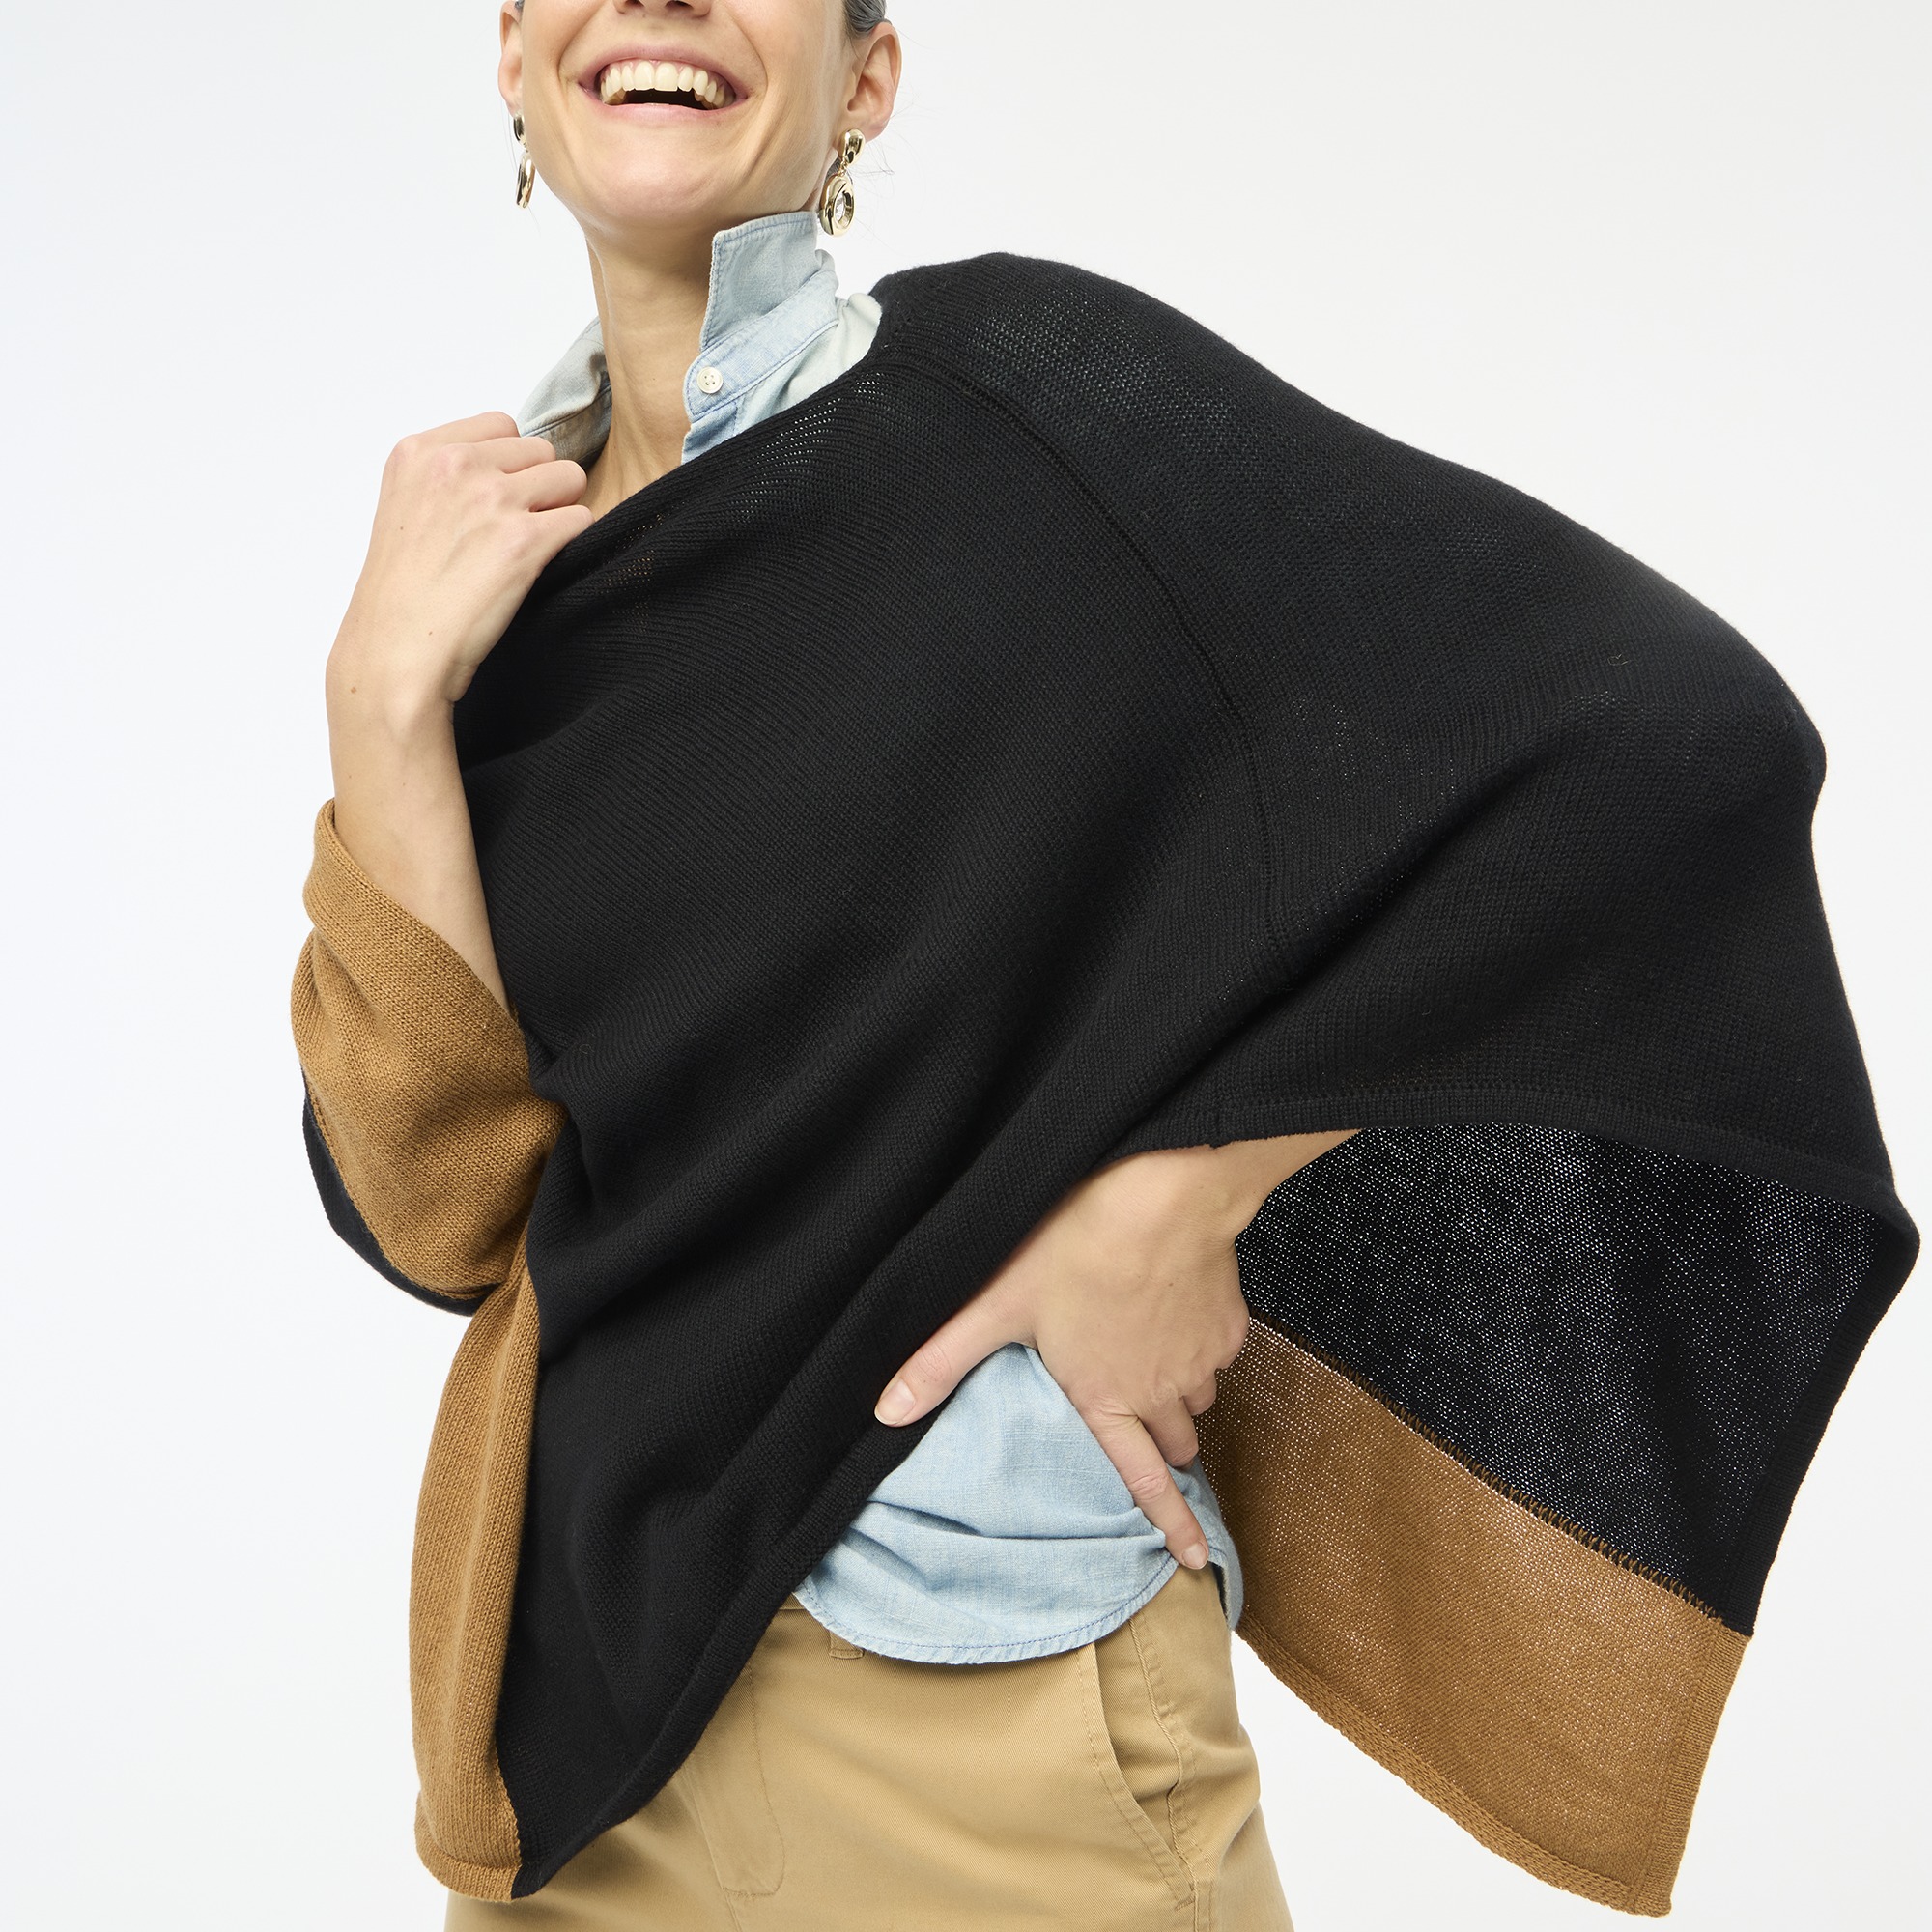 The Cable Knit Poncho Sweater –